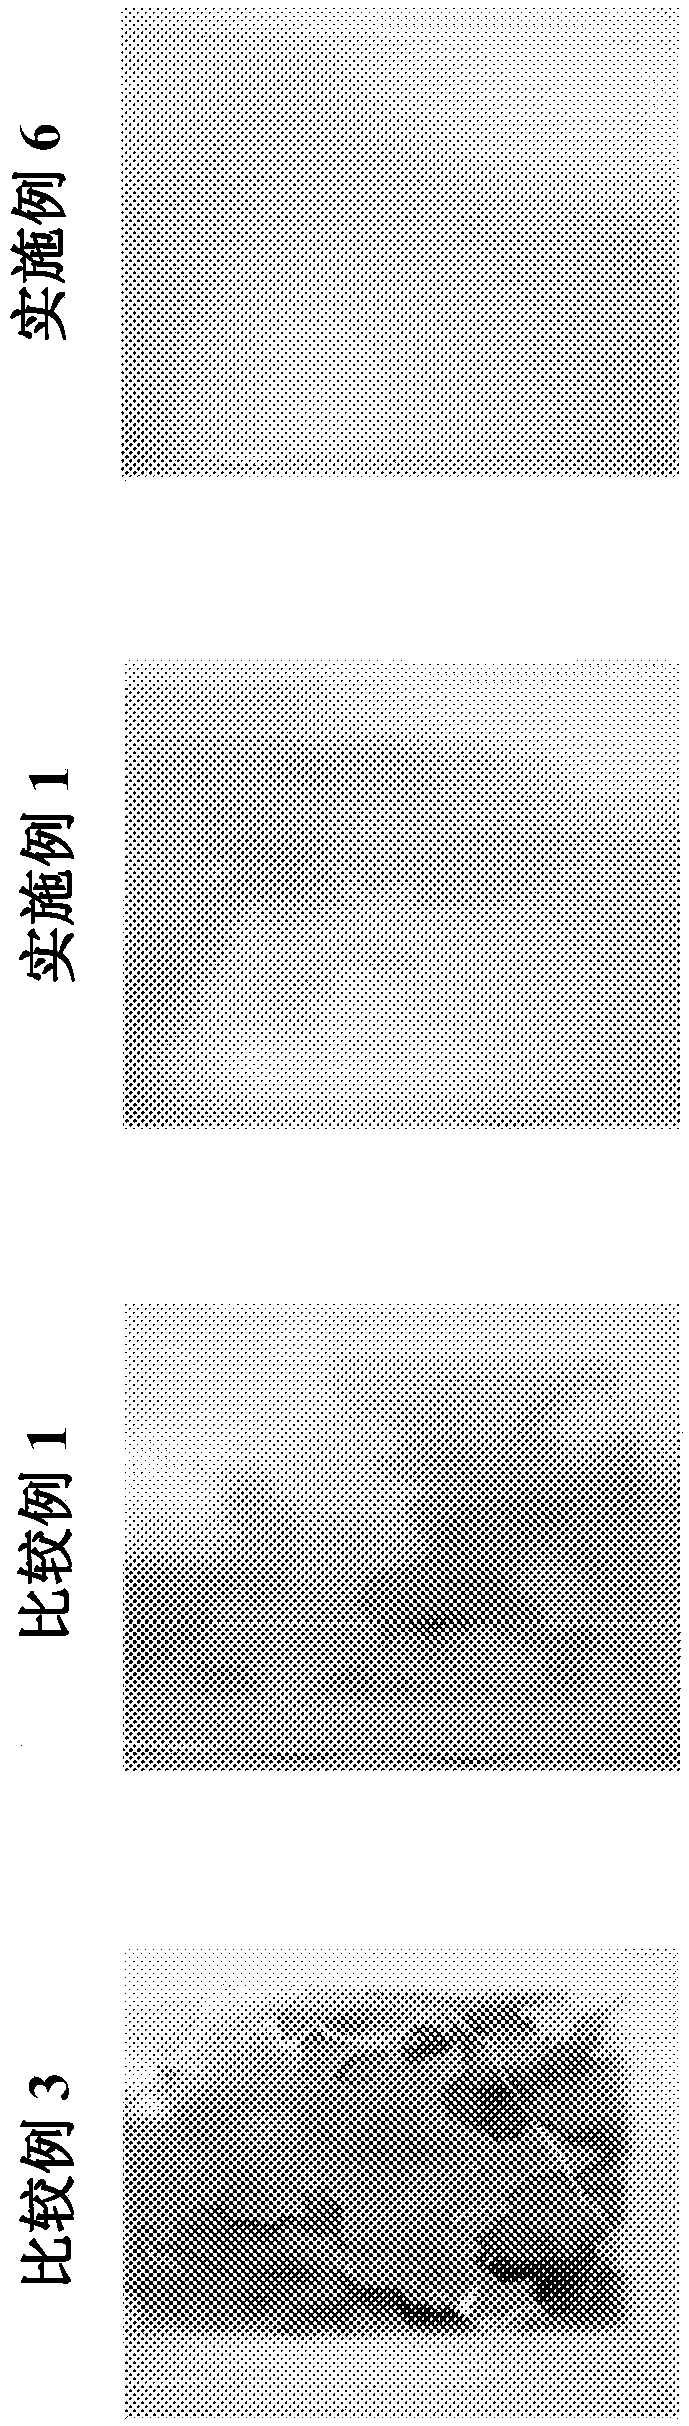 Plasticizer composition, resin composition, and preparation methods therefor